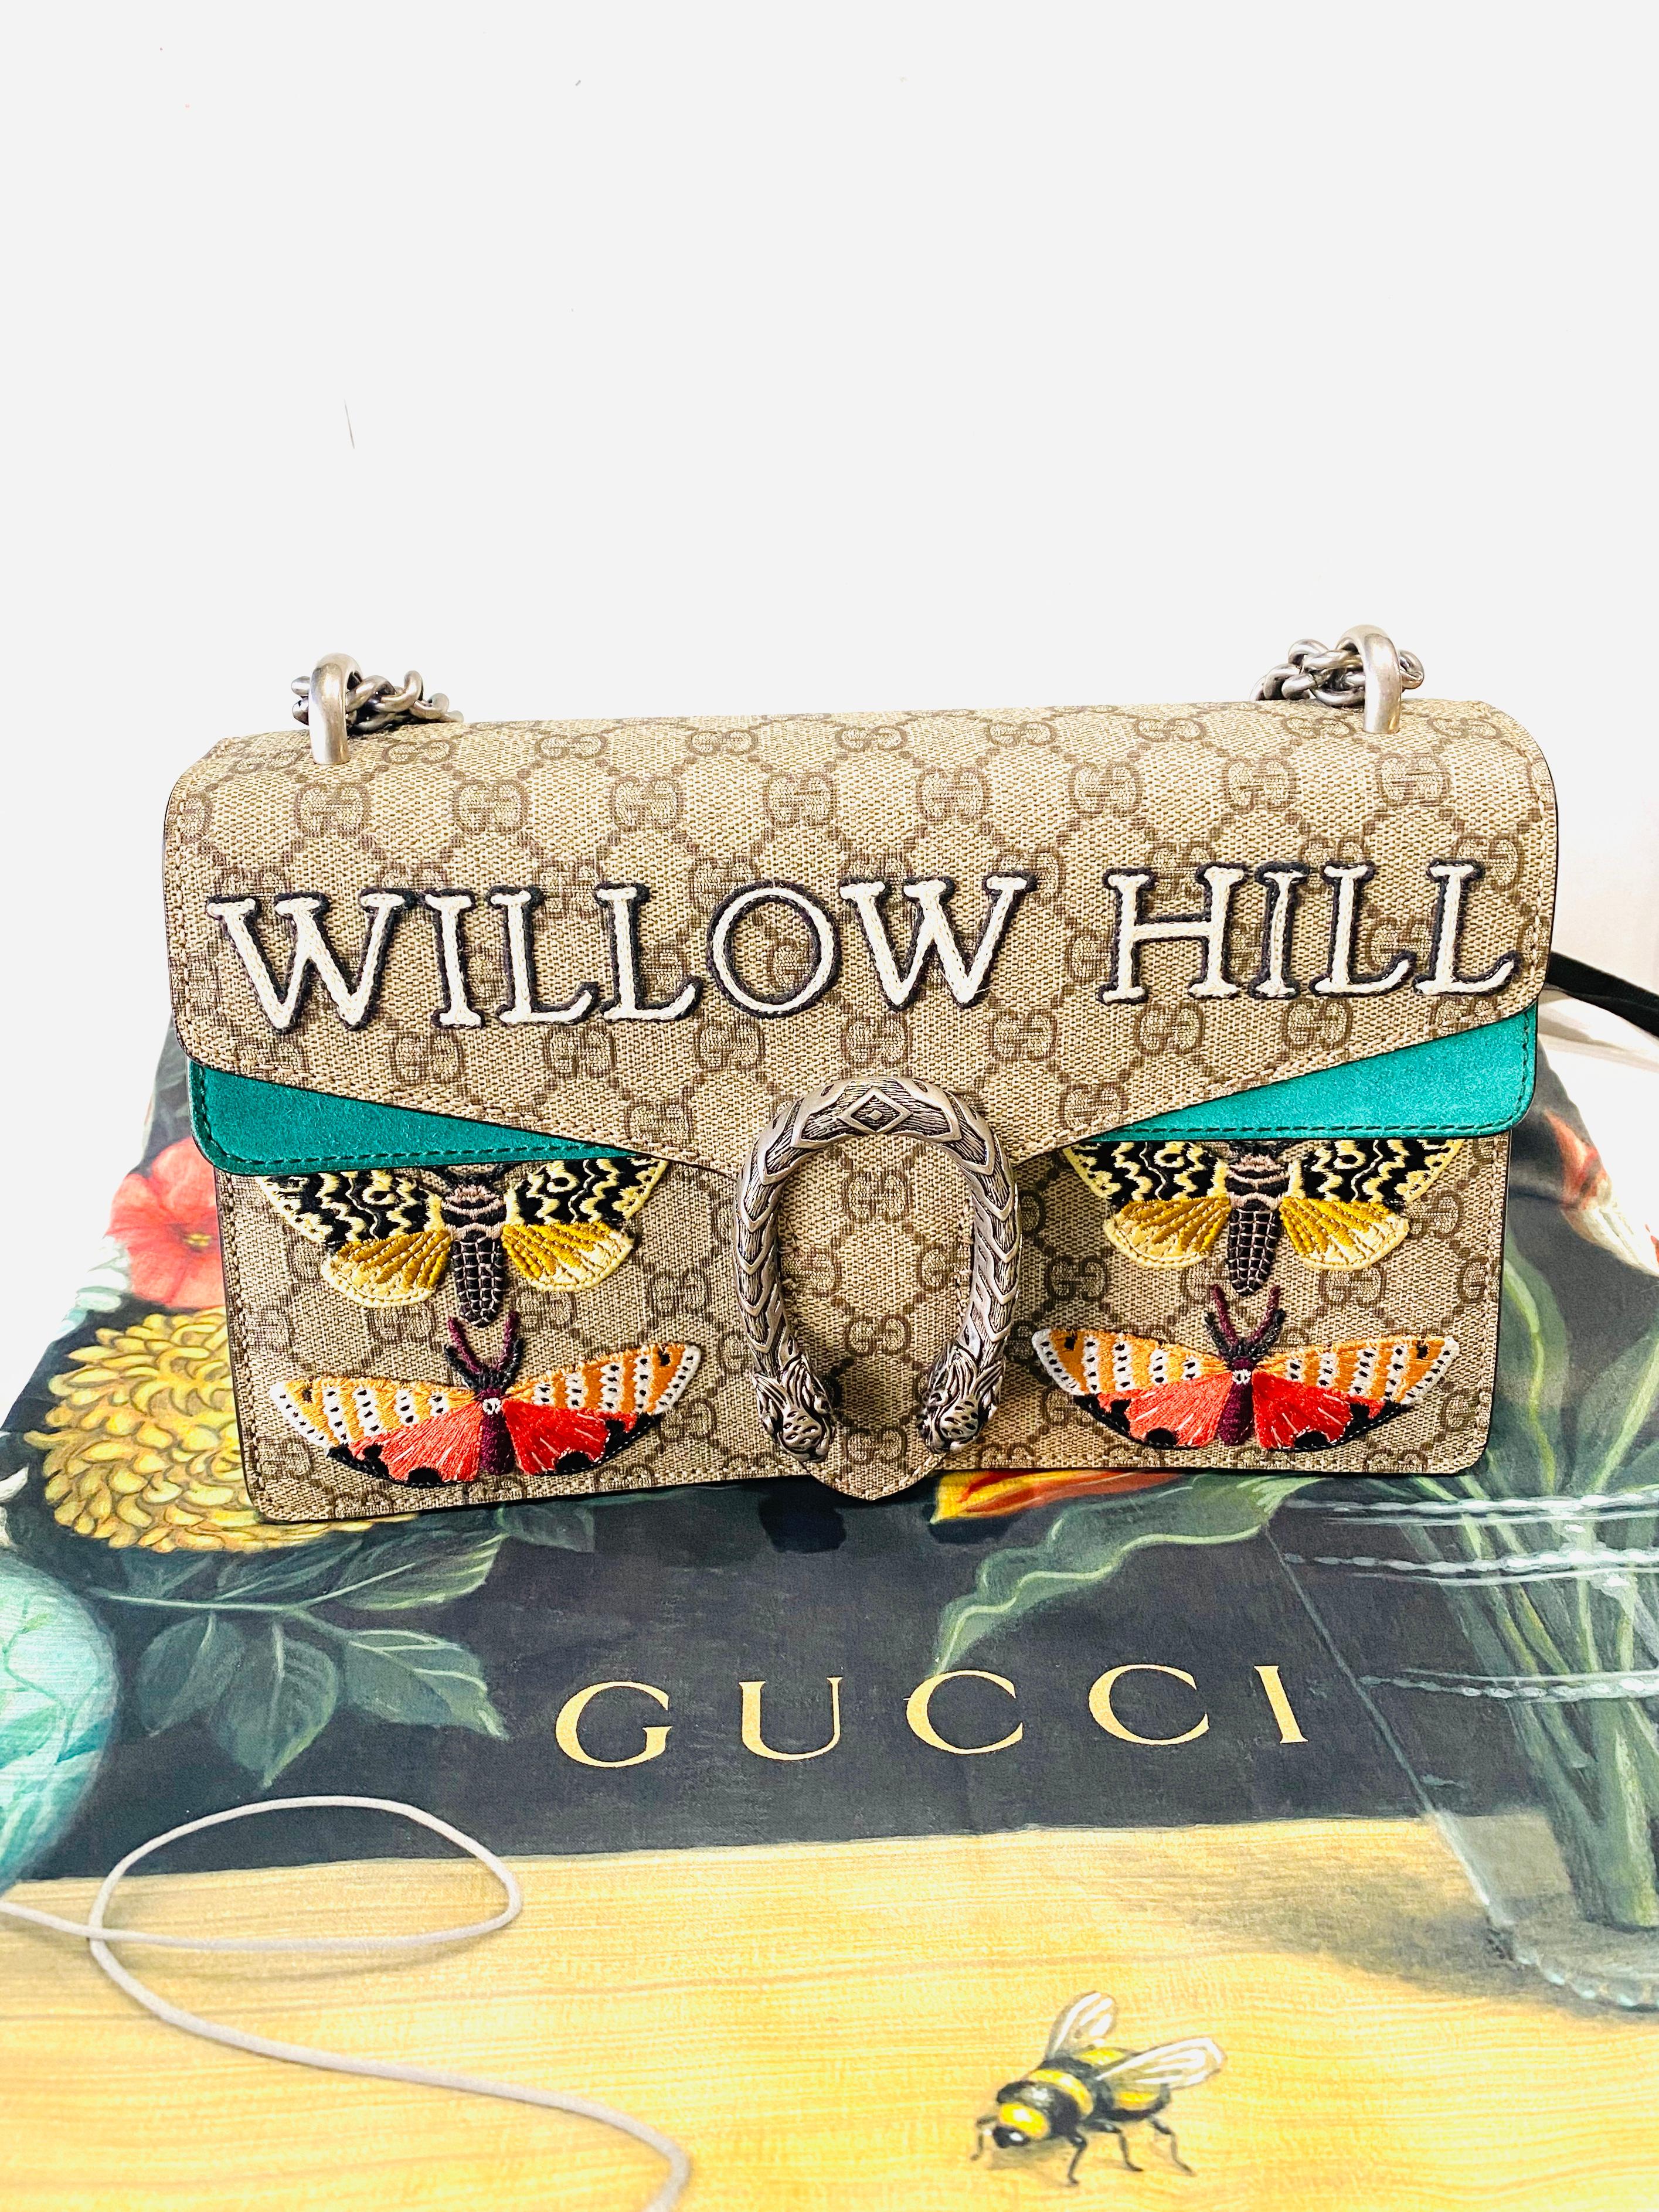 GUCCI Willow Hill Dionysus Beige GG Canvas Green Suede Embroidered Shoulder Bag  6